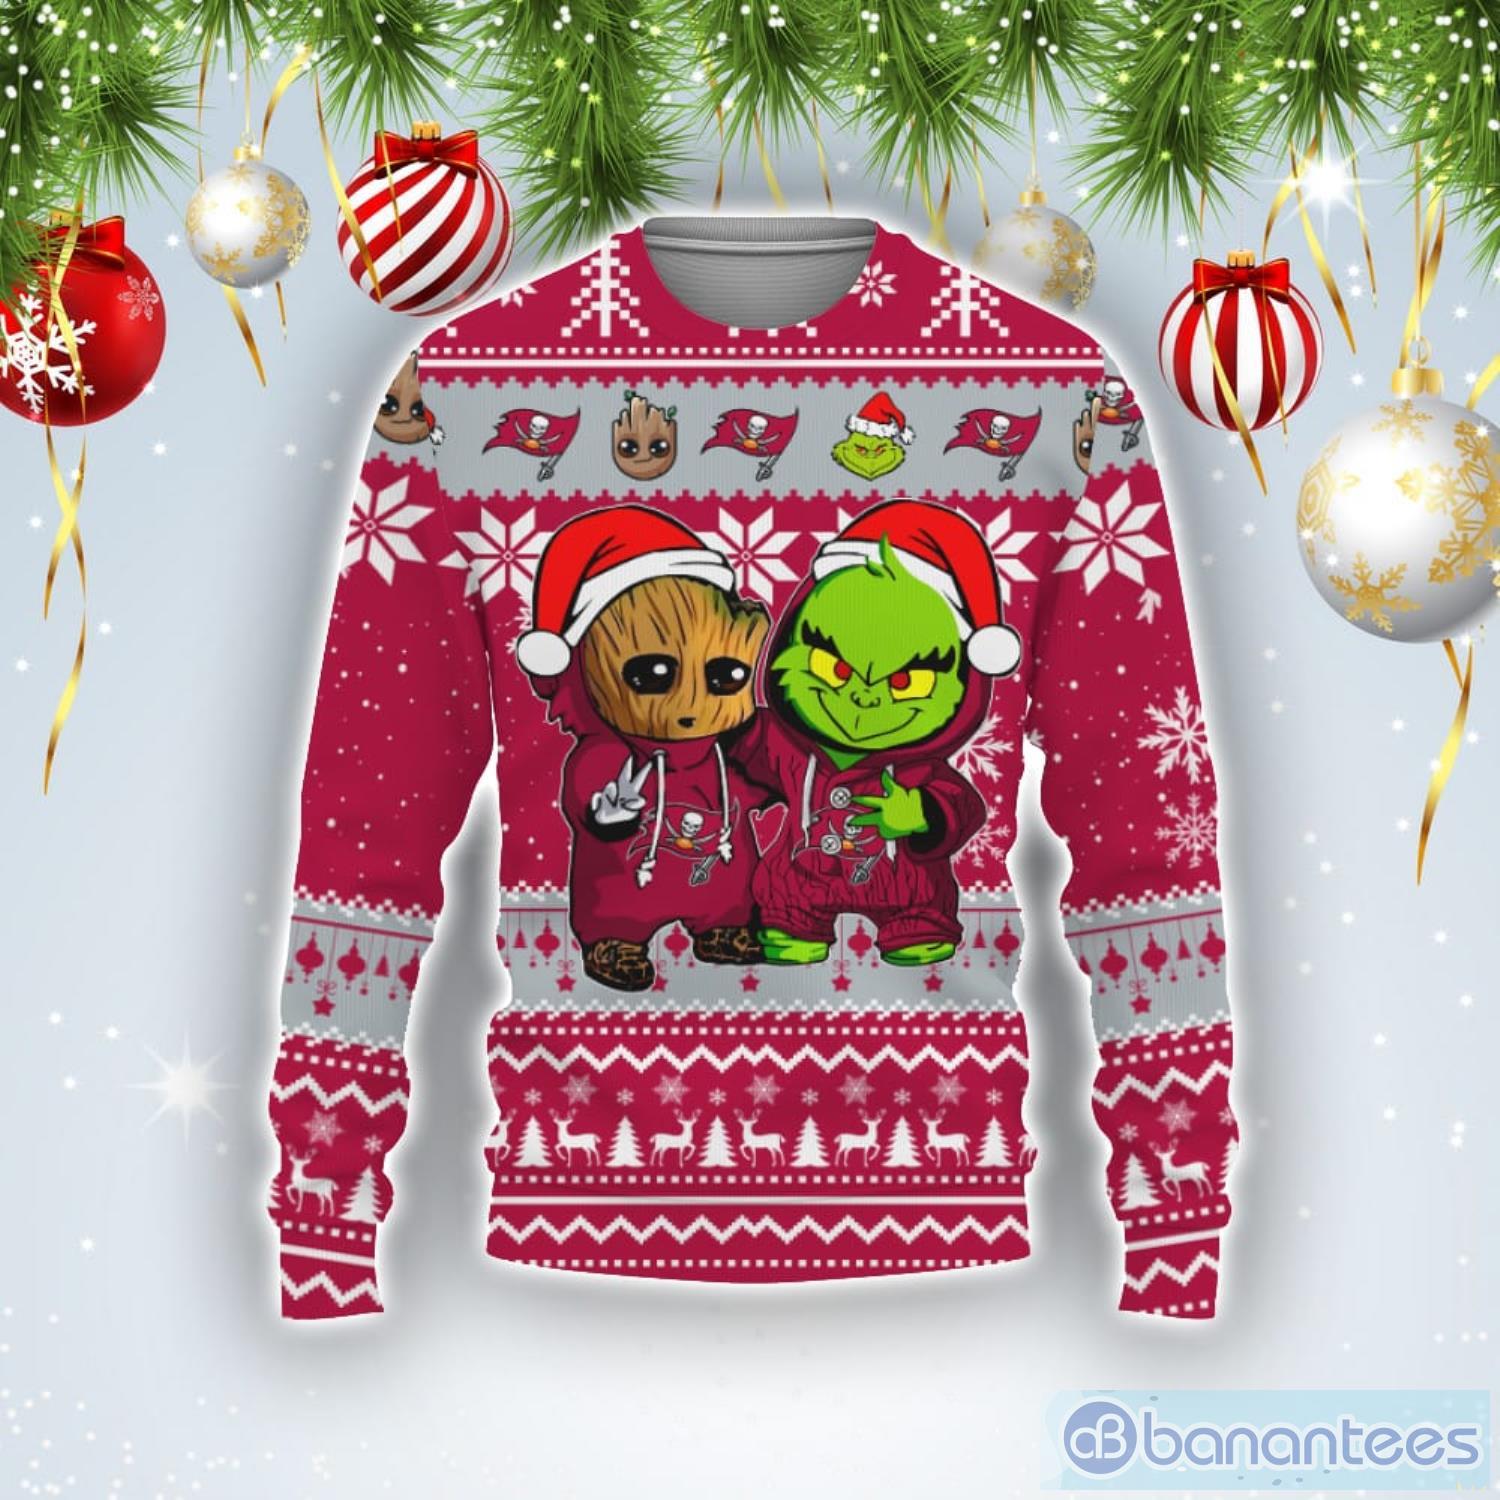 Tampa Bay Buccaneers Baby Groot And Grinch Best Friends Football American Ugly Christmas Sweater Product Photo 1